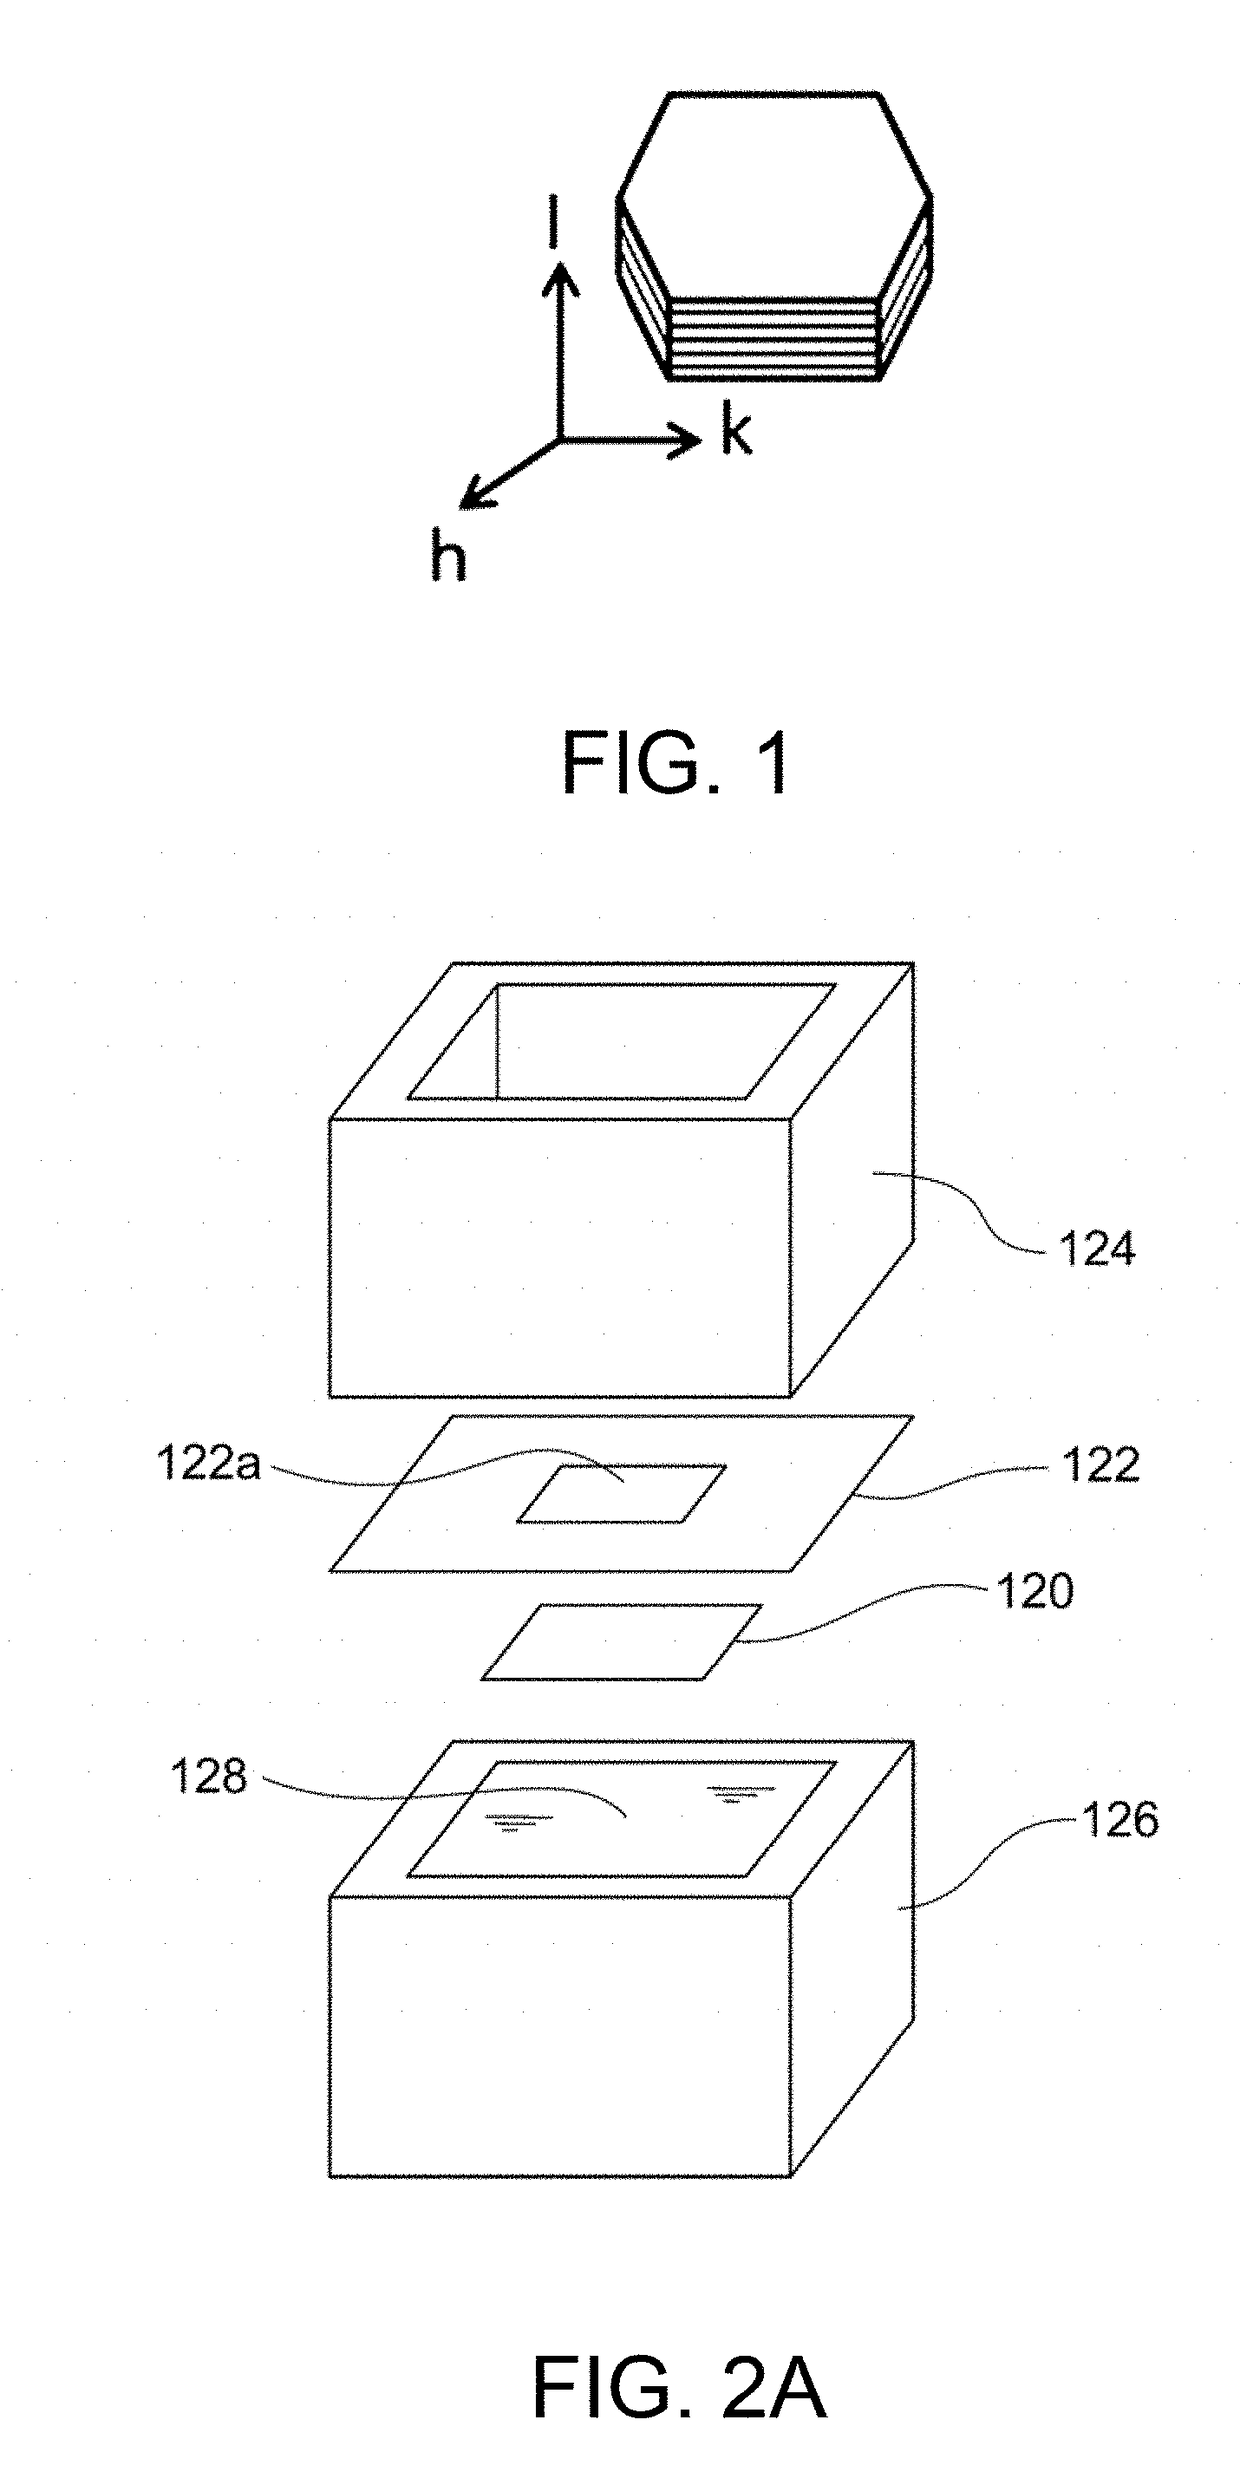 Layered double hydroxide film and composite material containing layered double hydroxide